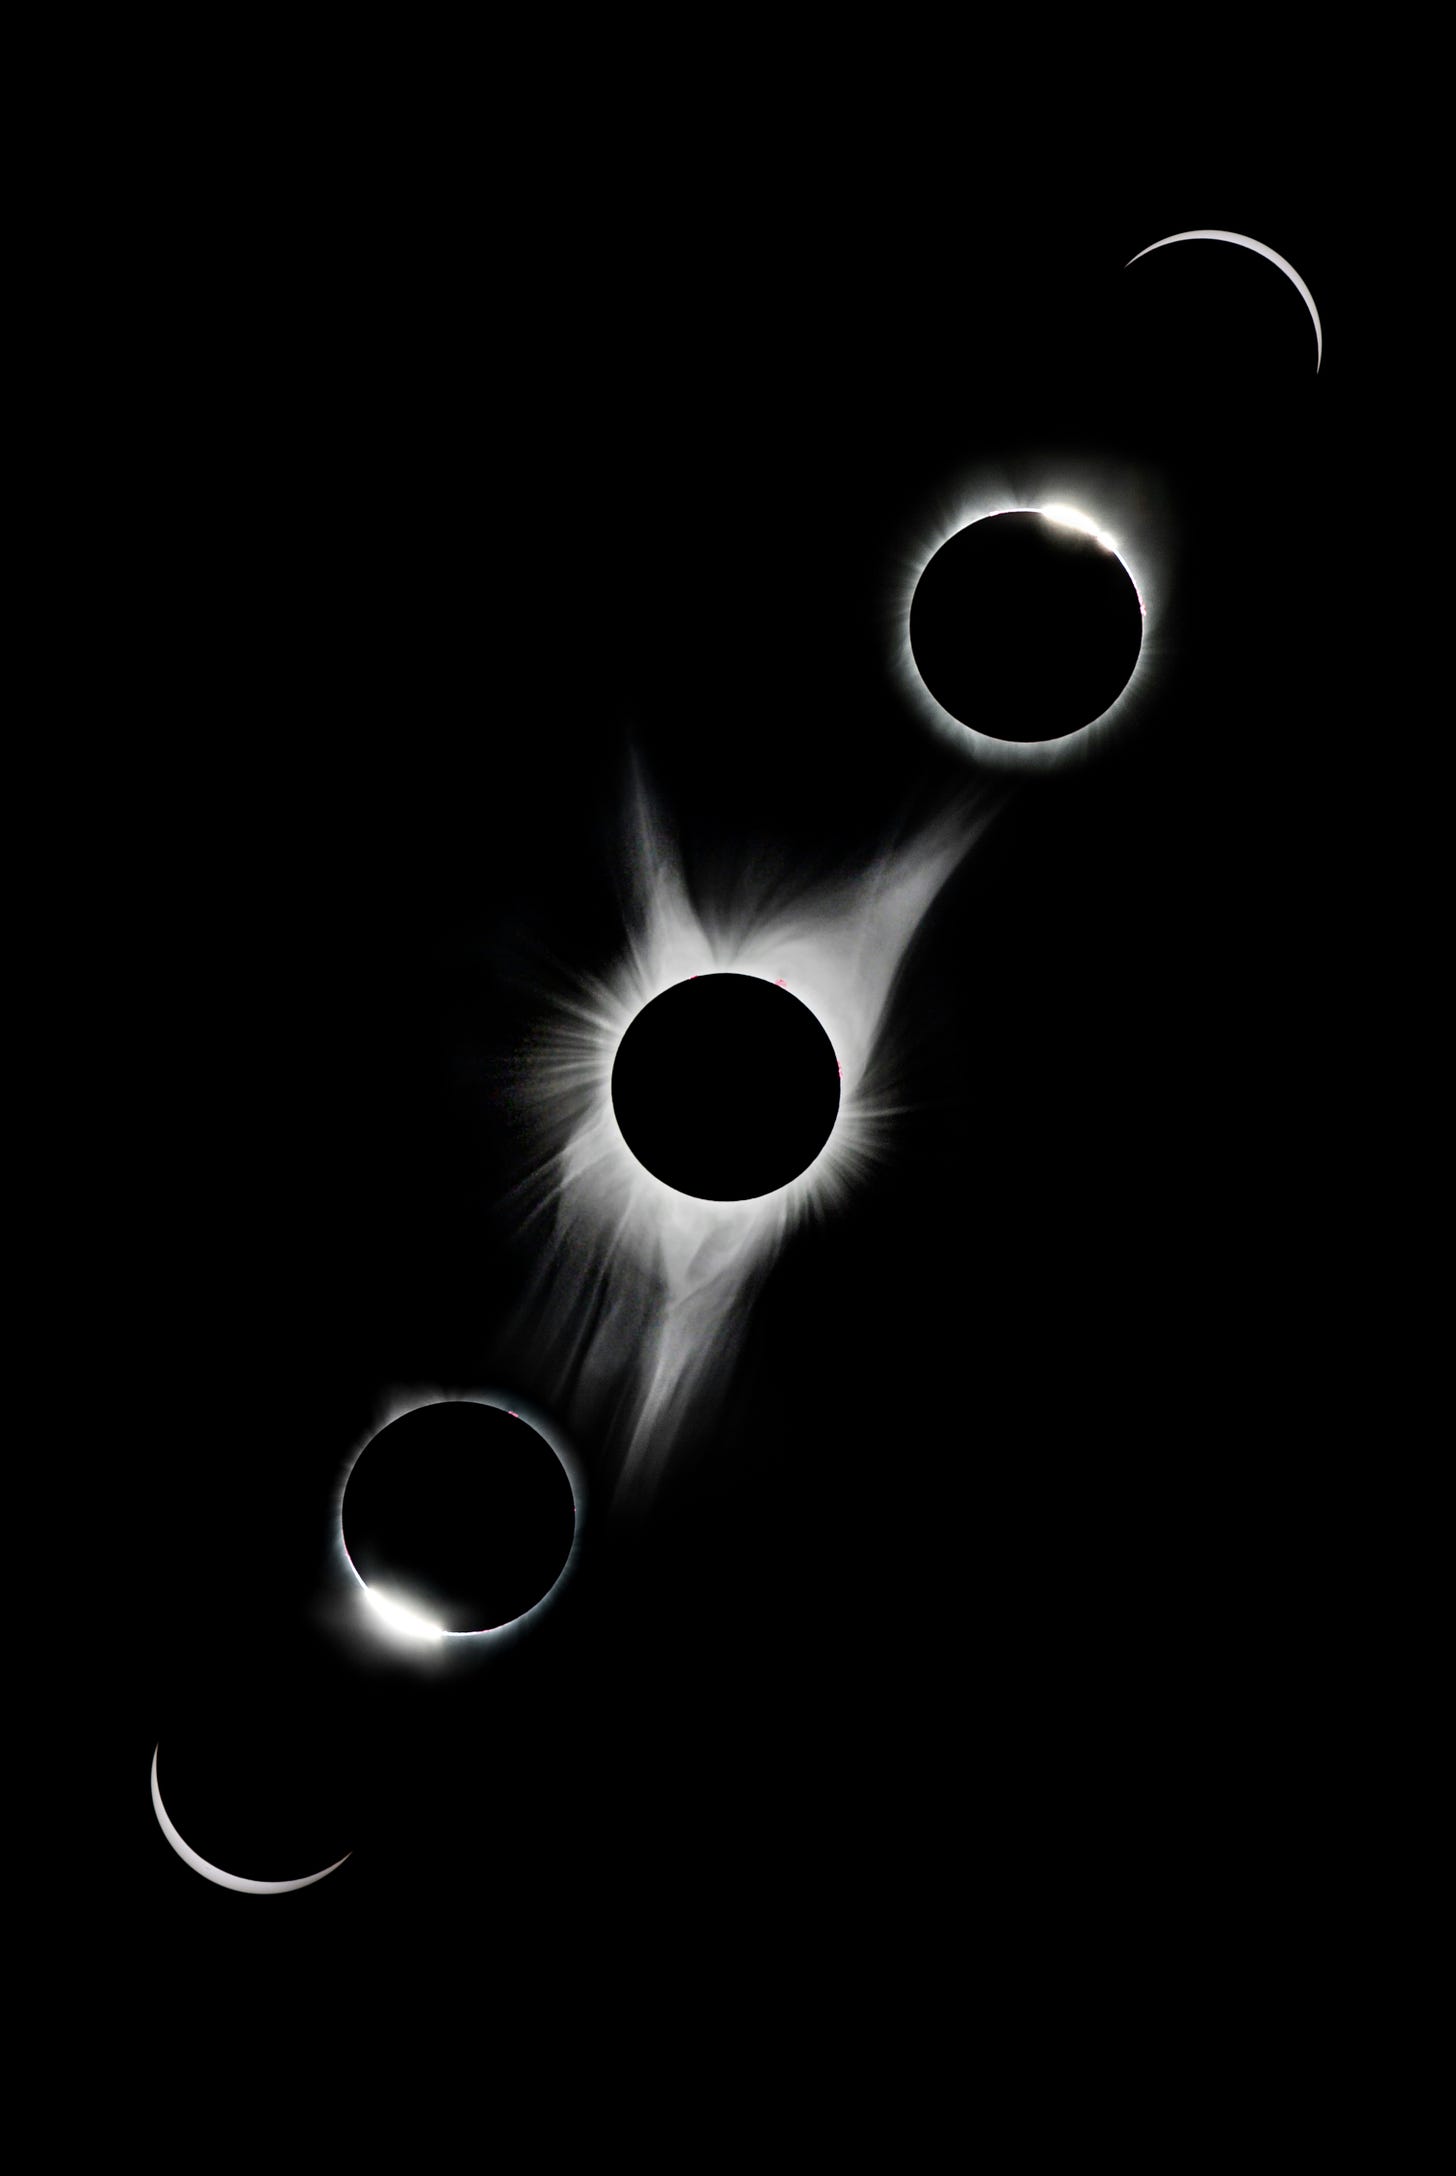 Solar eclipse sequence photo Photo by Ian Parker on Unsplash